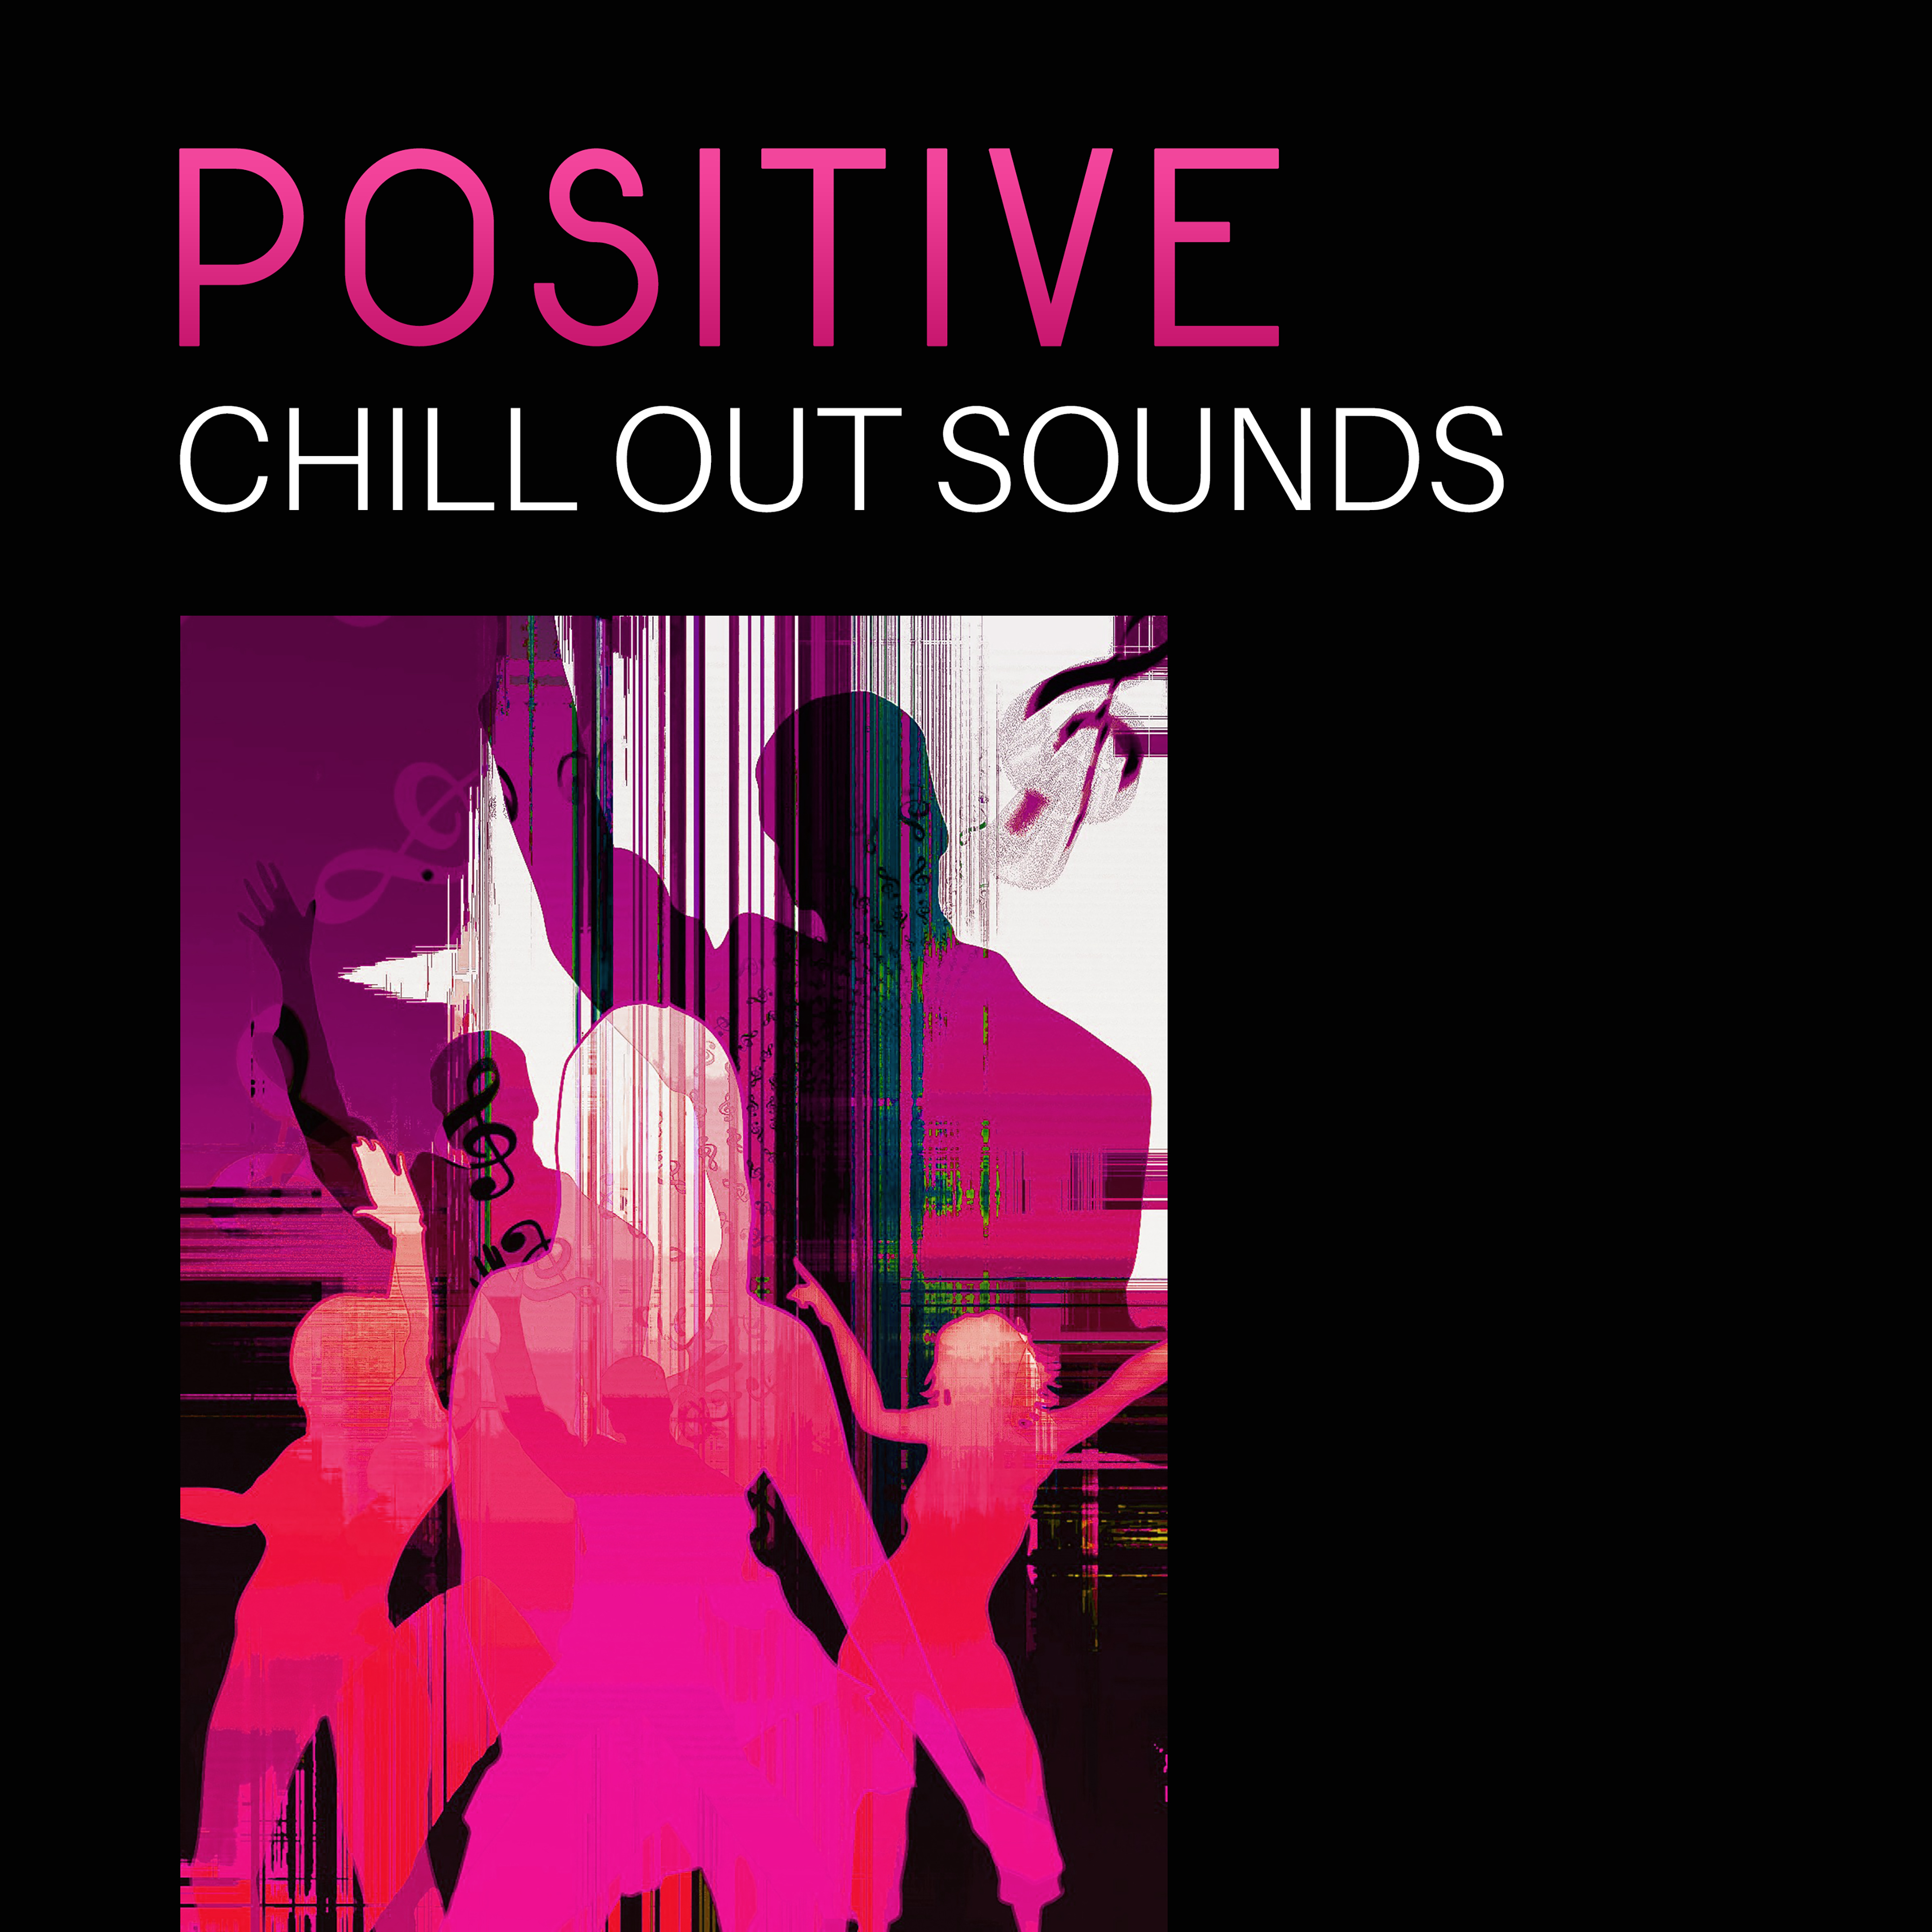 Positive Chill Out Sounds – Summer Time Relax, Chill Out Music for Peaceful Mind, Holiday Rest, Beach Lounge